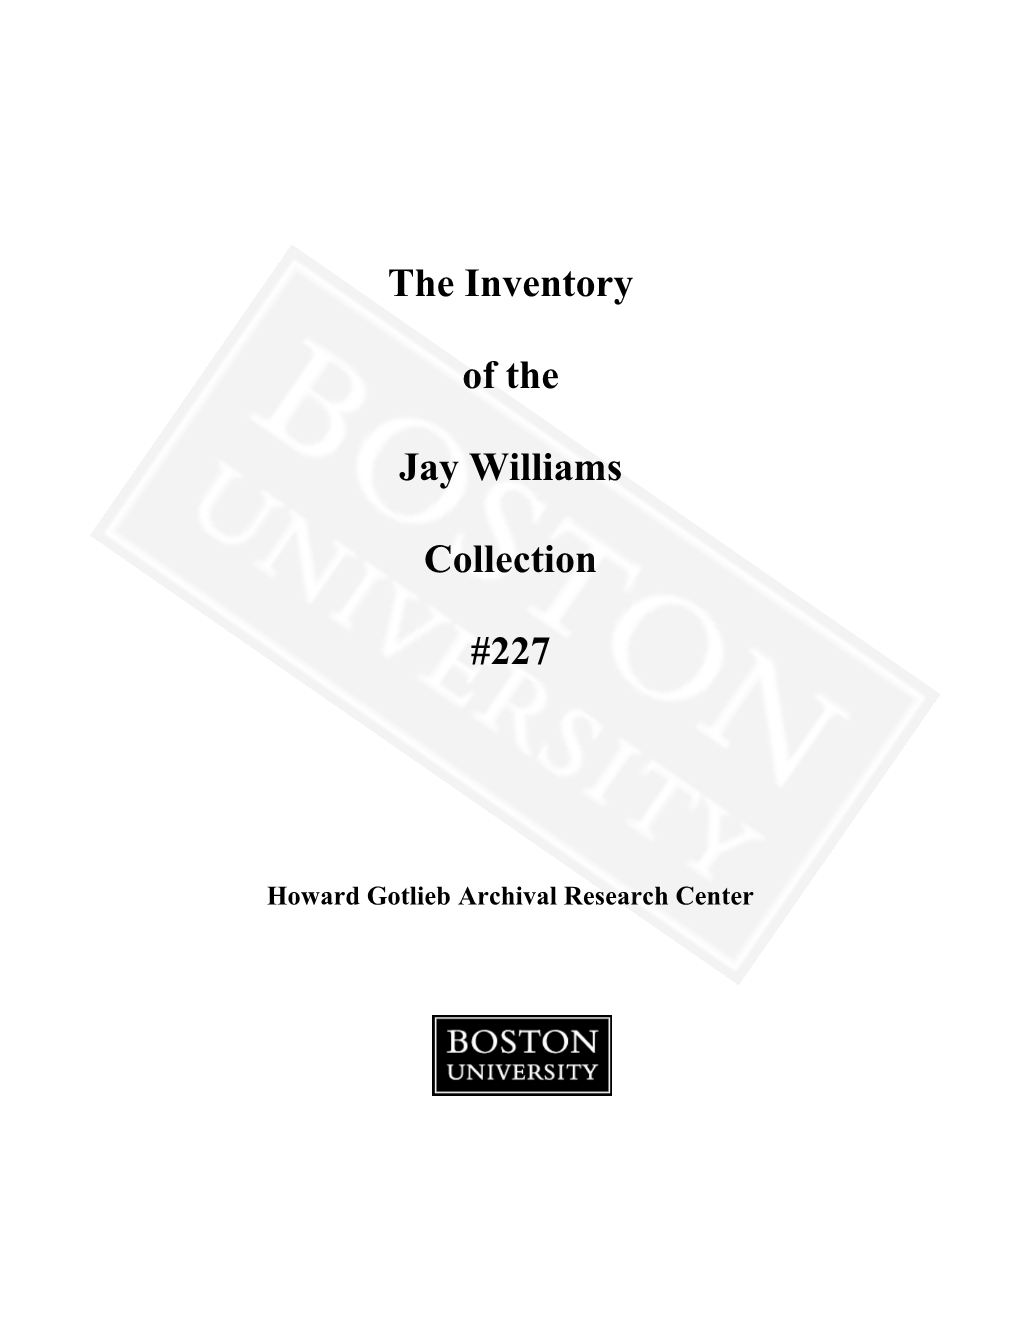 The Inventory of the Jay Williams Collection #227